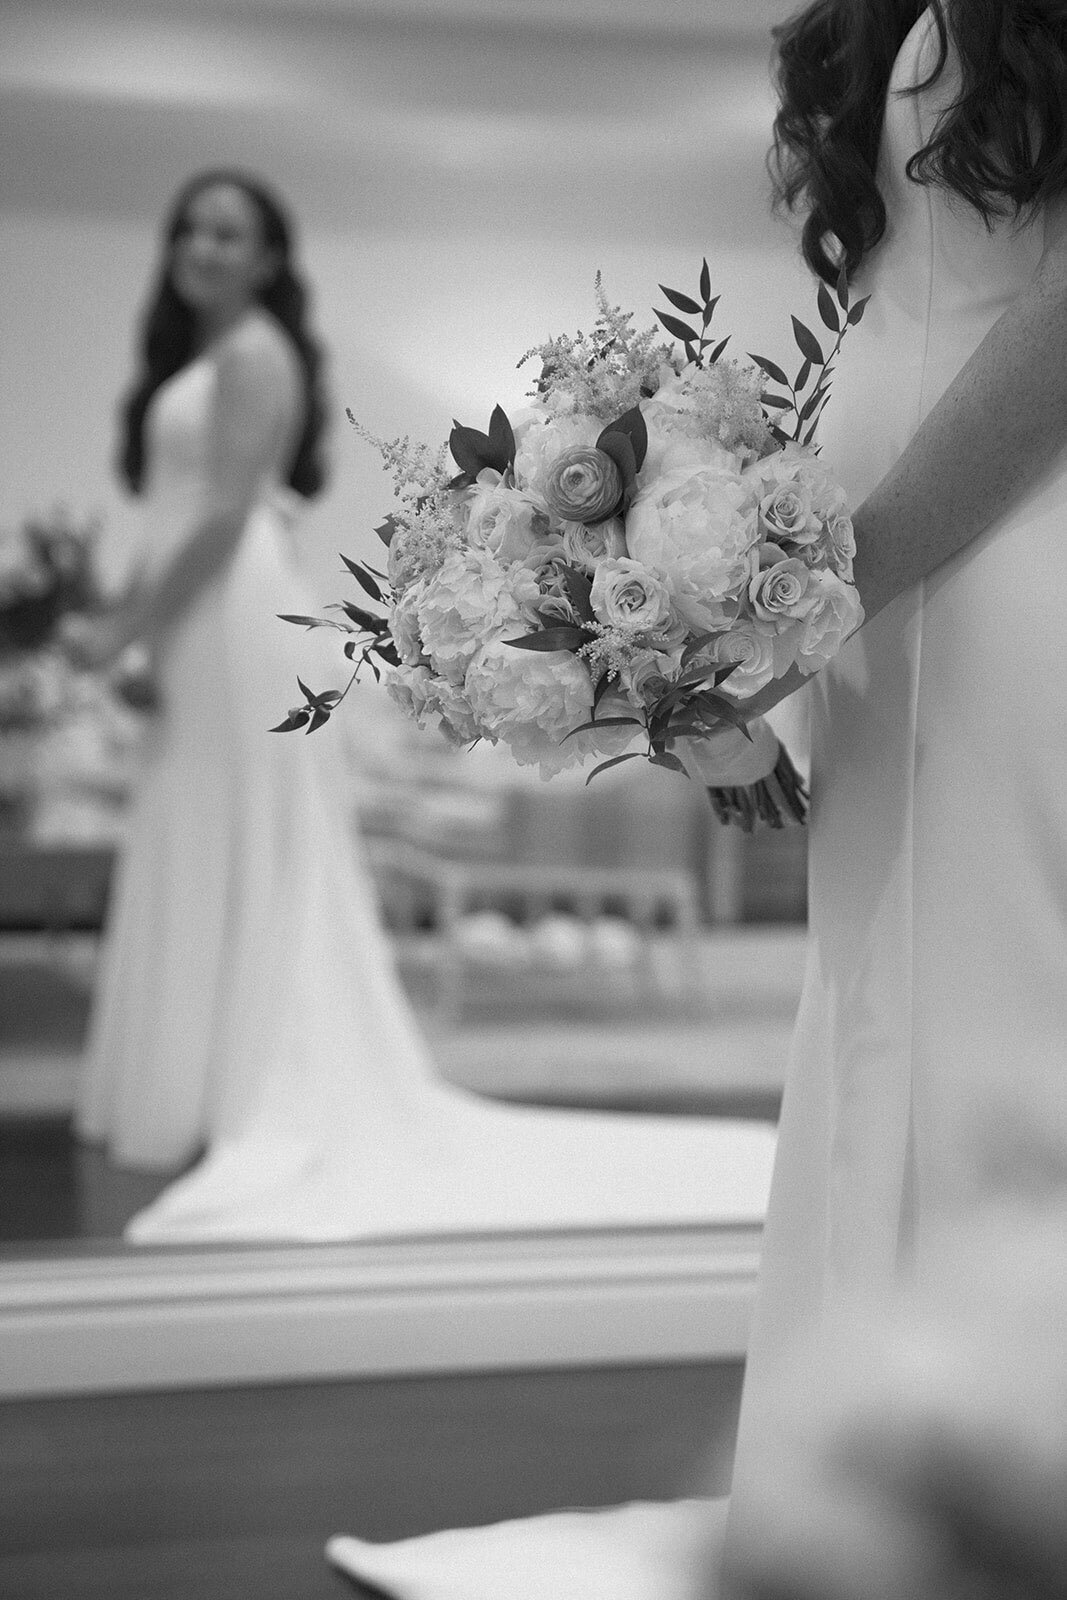 Bride standing with floral bouquet and bridesmaid in the background